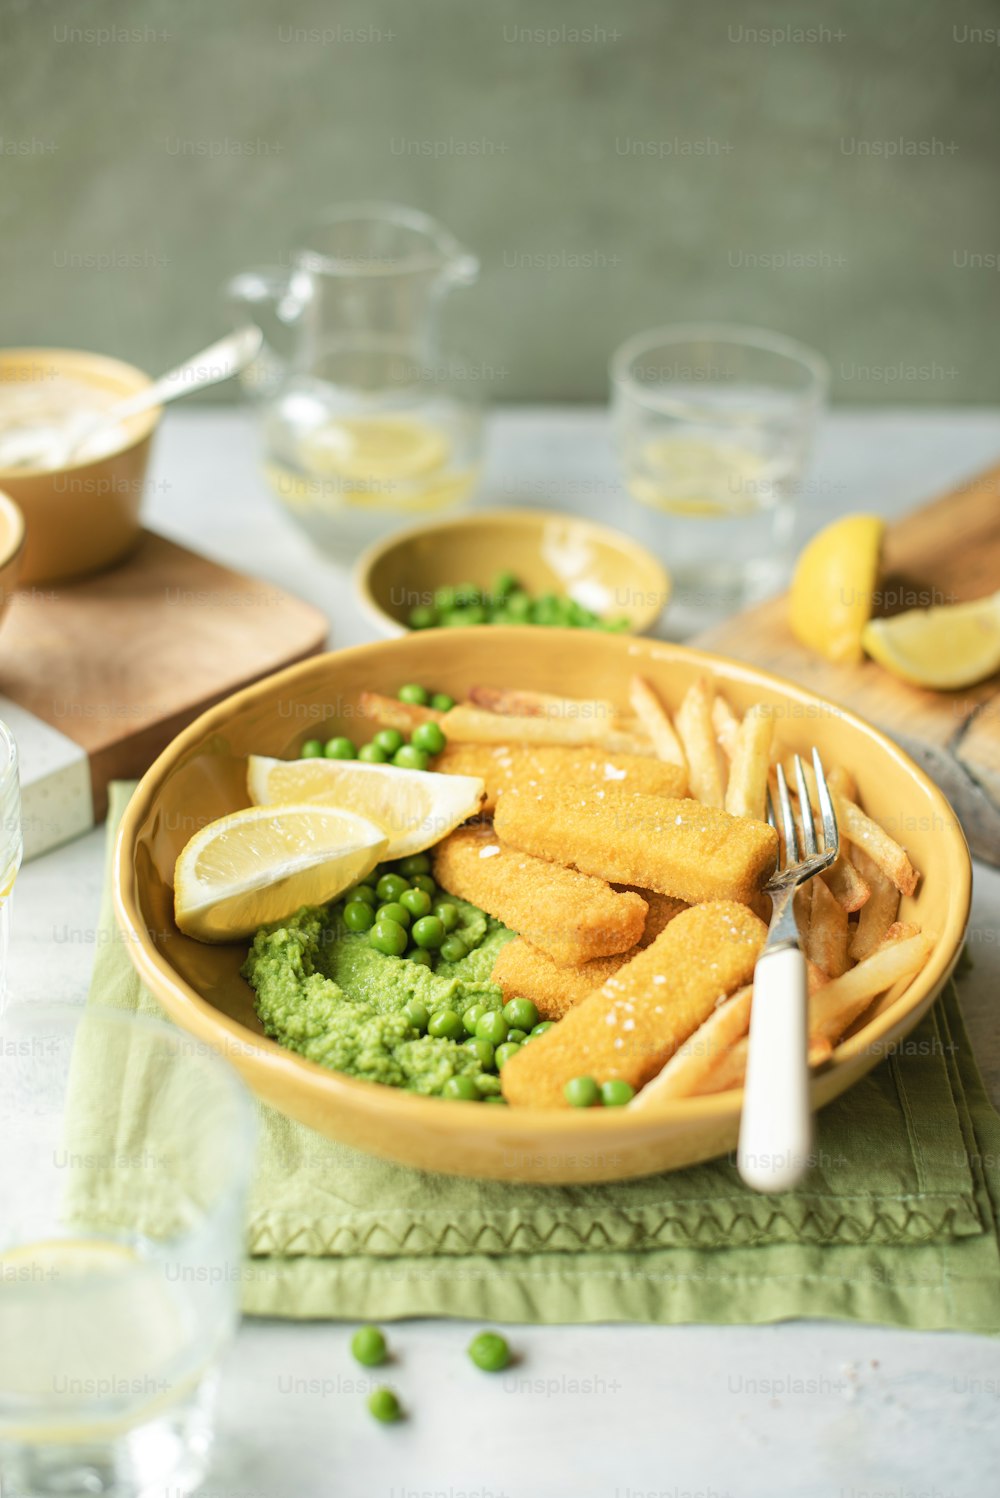 a bowl of food with peas and lemon wedges